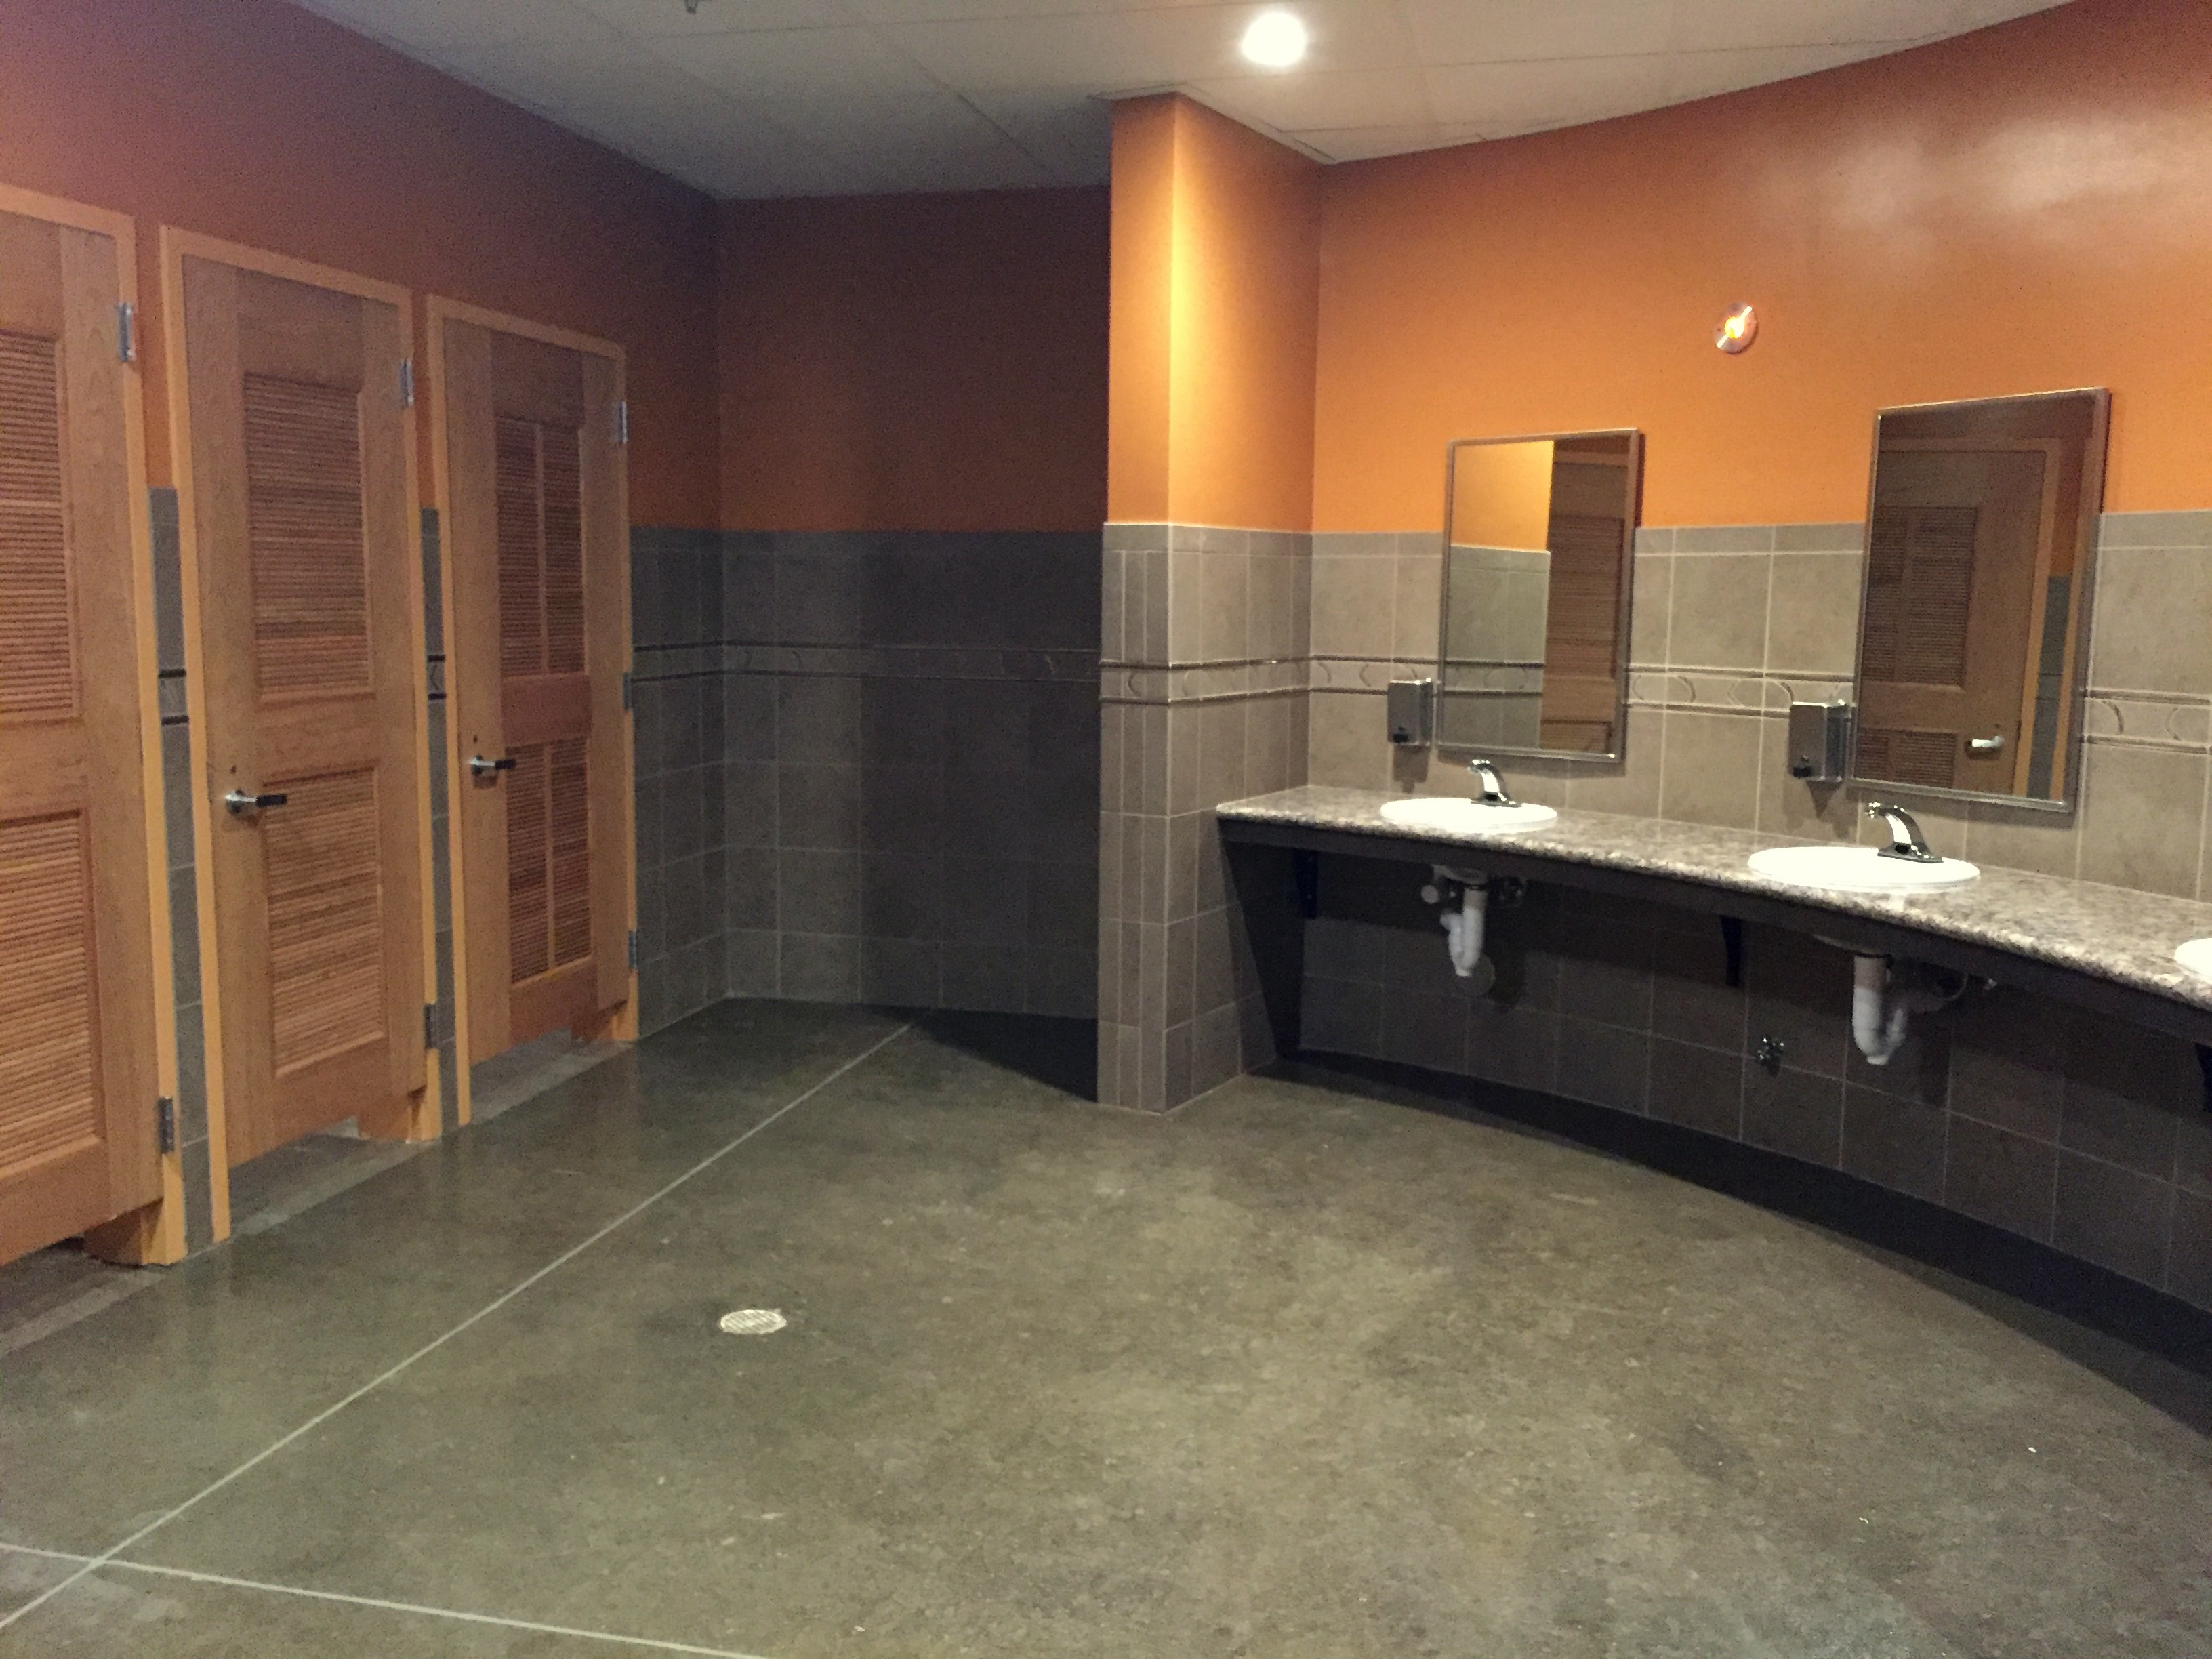 Clean, well-appointed restrooms (because I know some of you wonder about these things!)